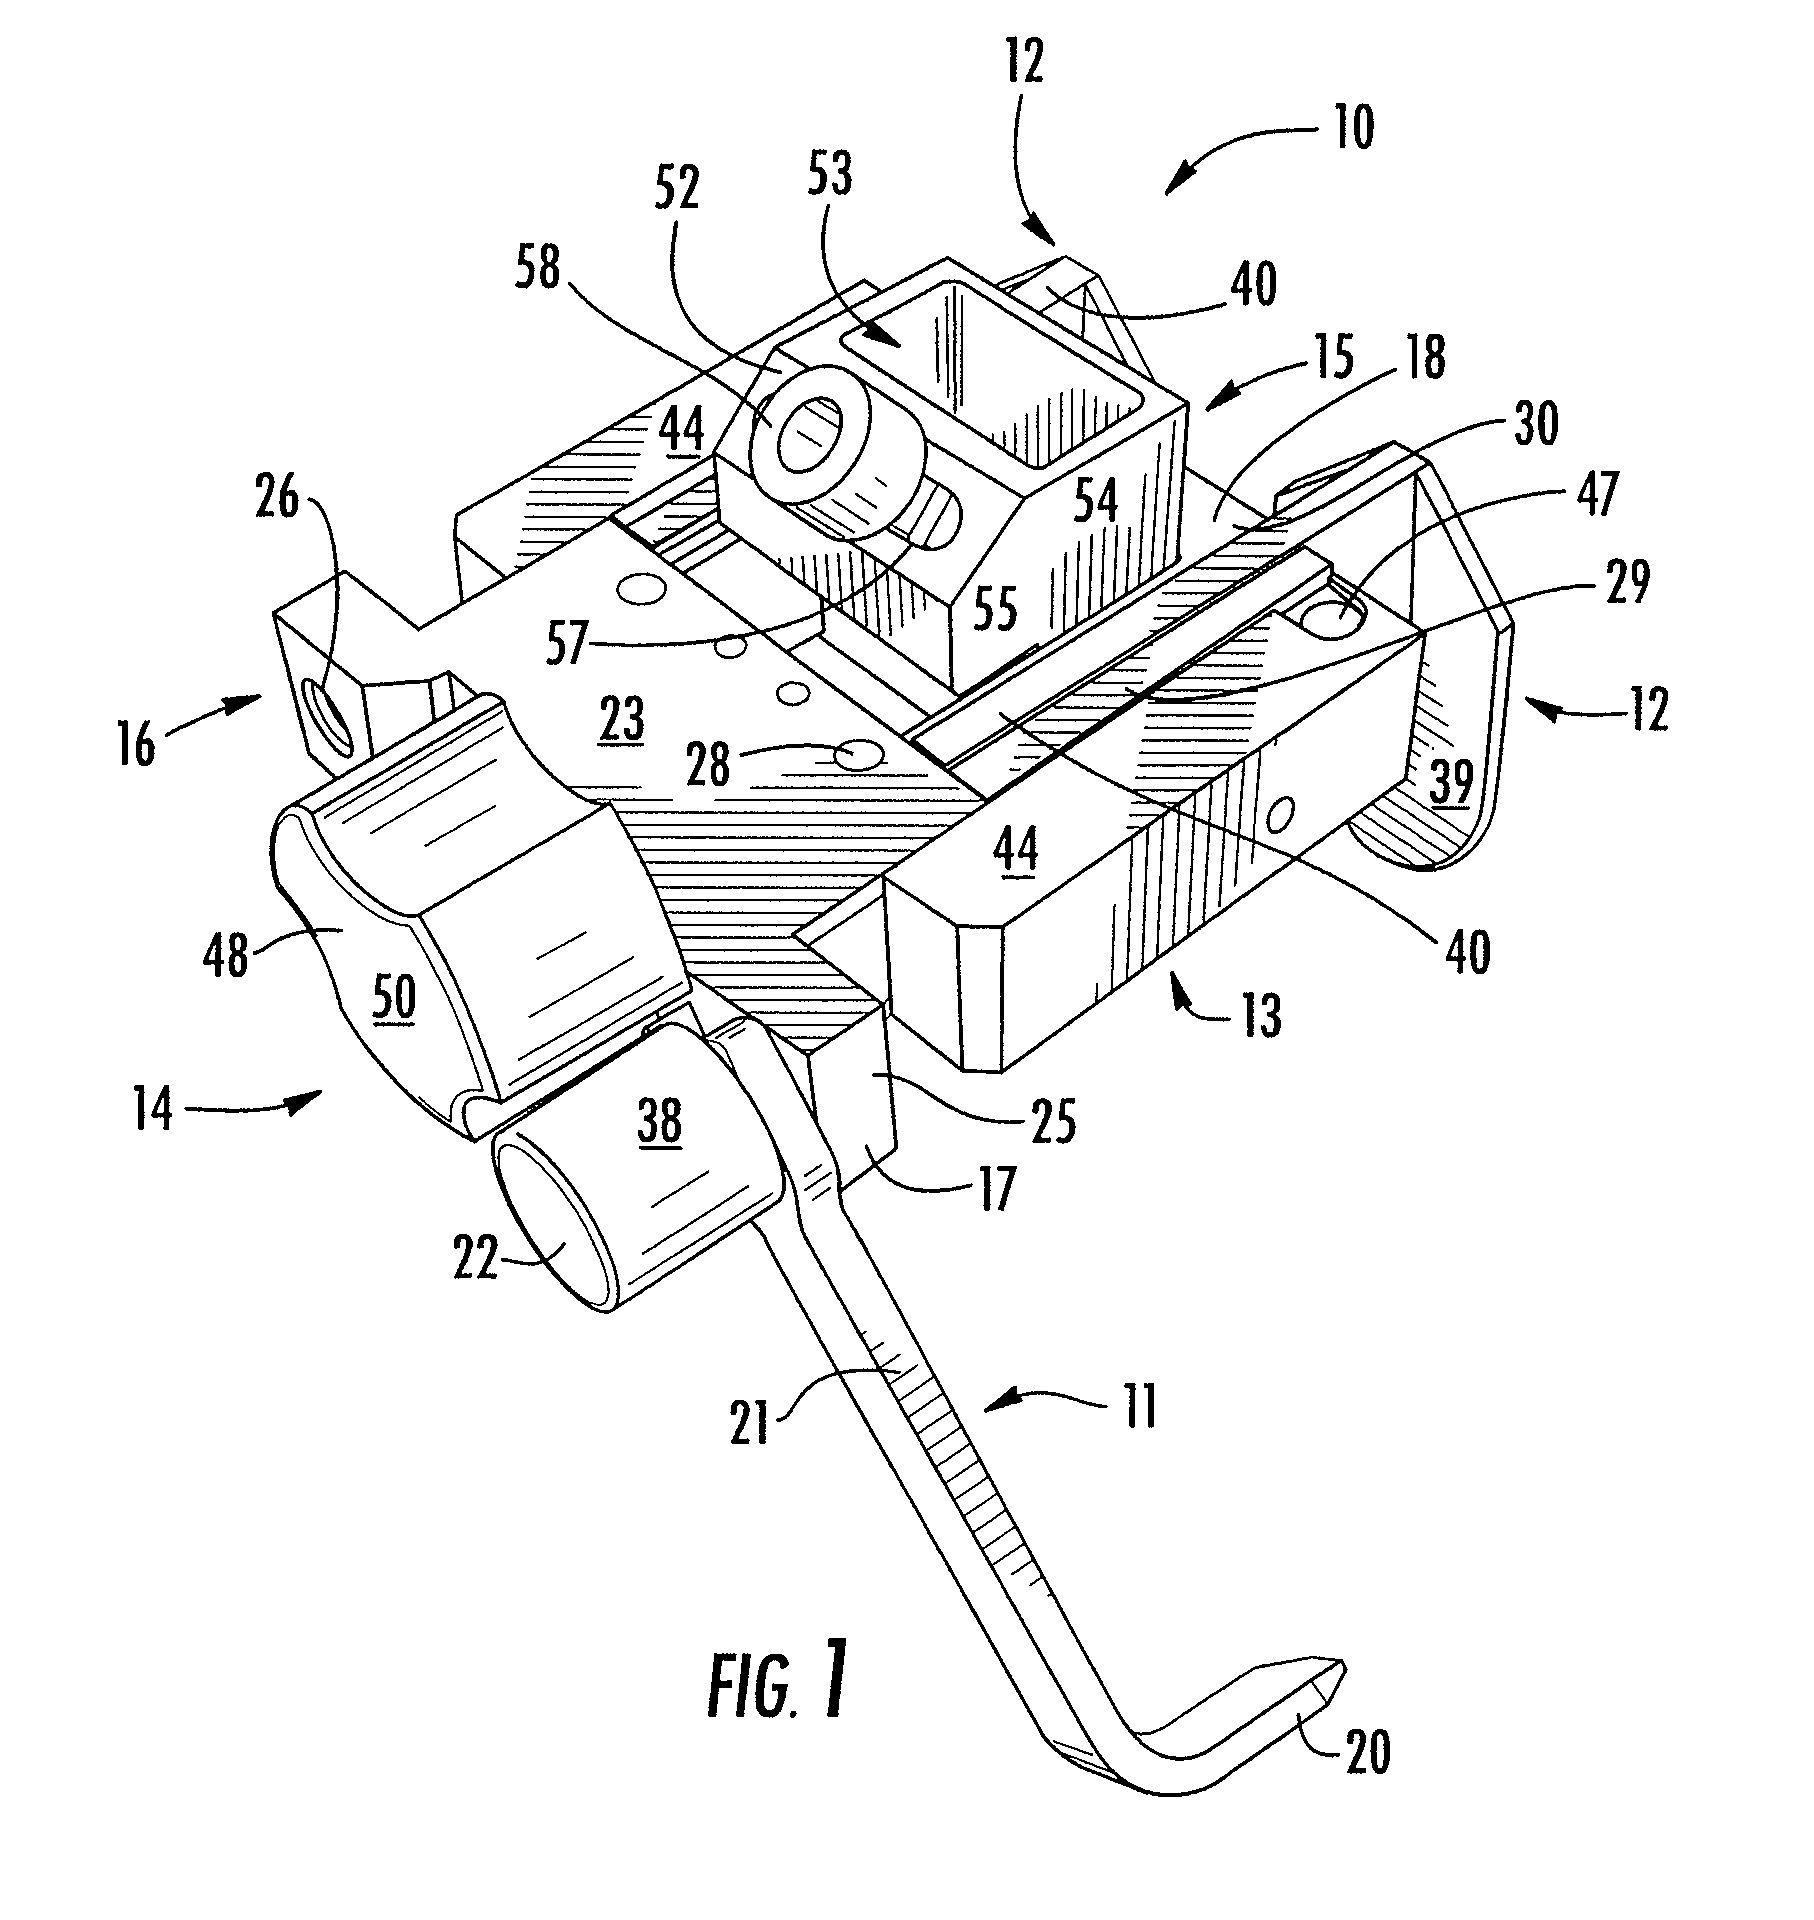 Reference mark adjustment mechanism for a femoral caliper and method of using the same